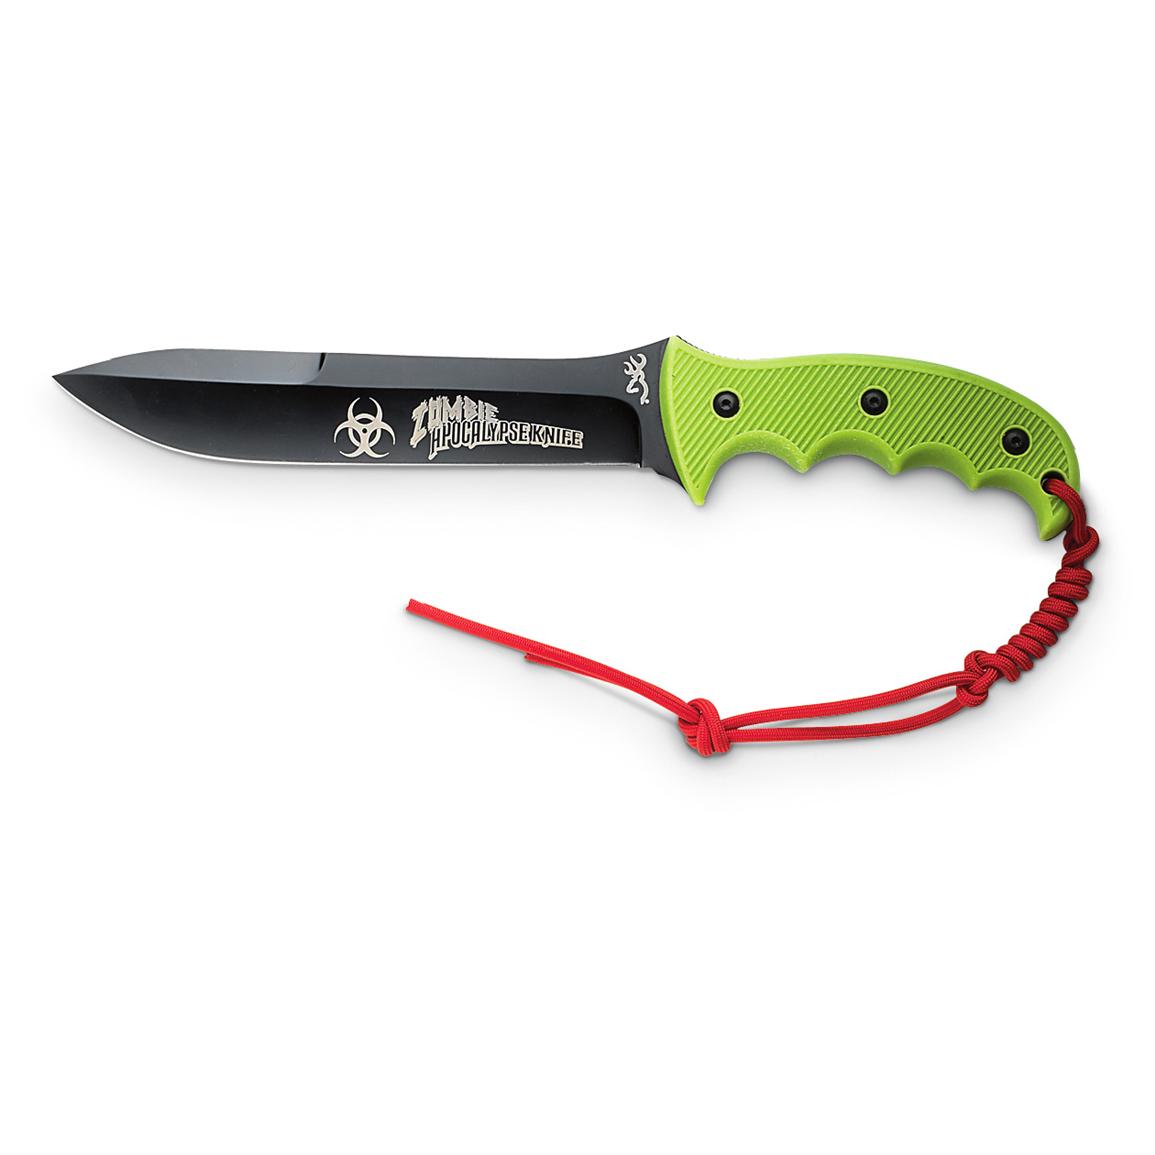 Zombie Apocalypse Knife - 224781, Tactical Knives at Sportsman's Guide